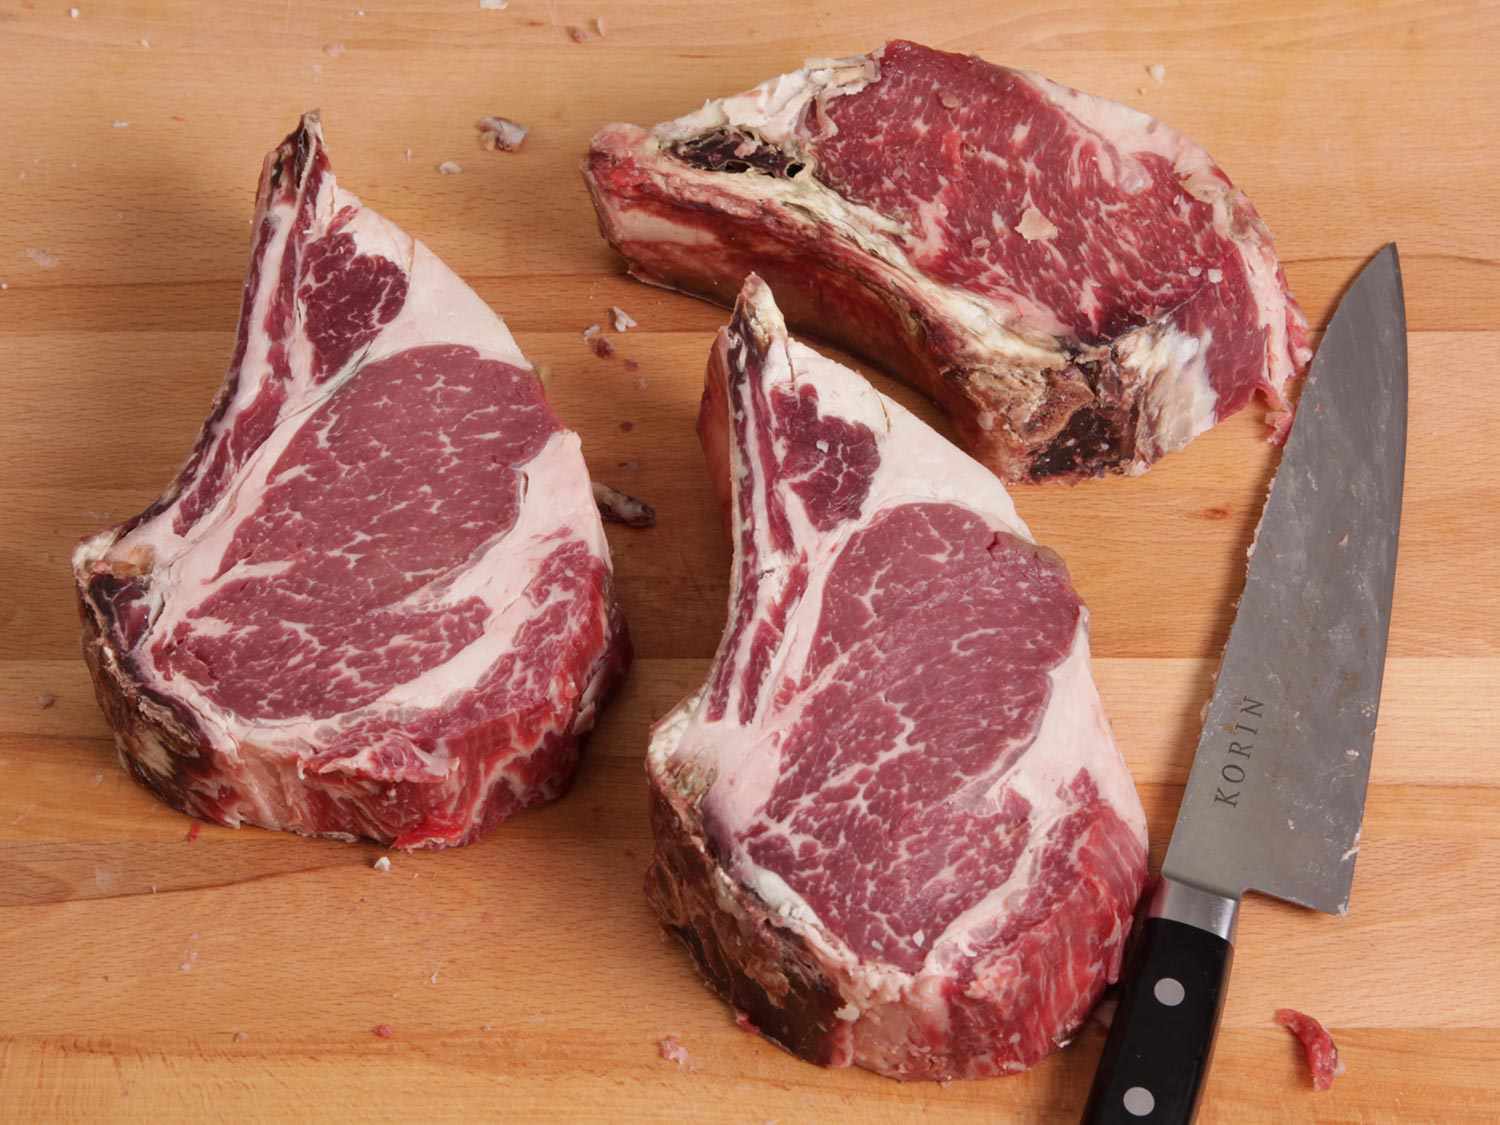 Three thick steaks on a wooden surface next to a large knife